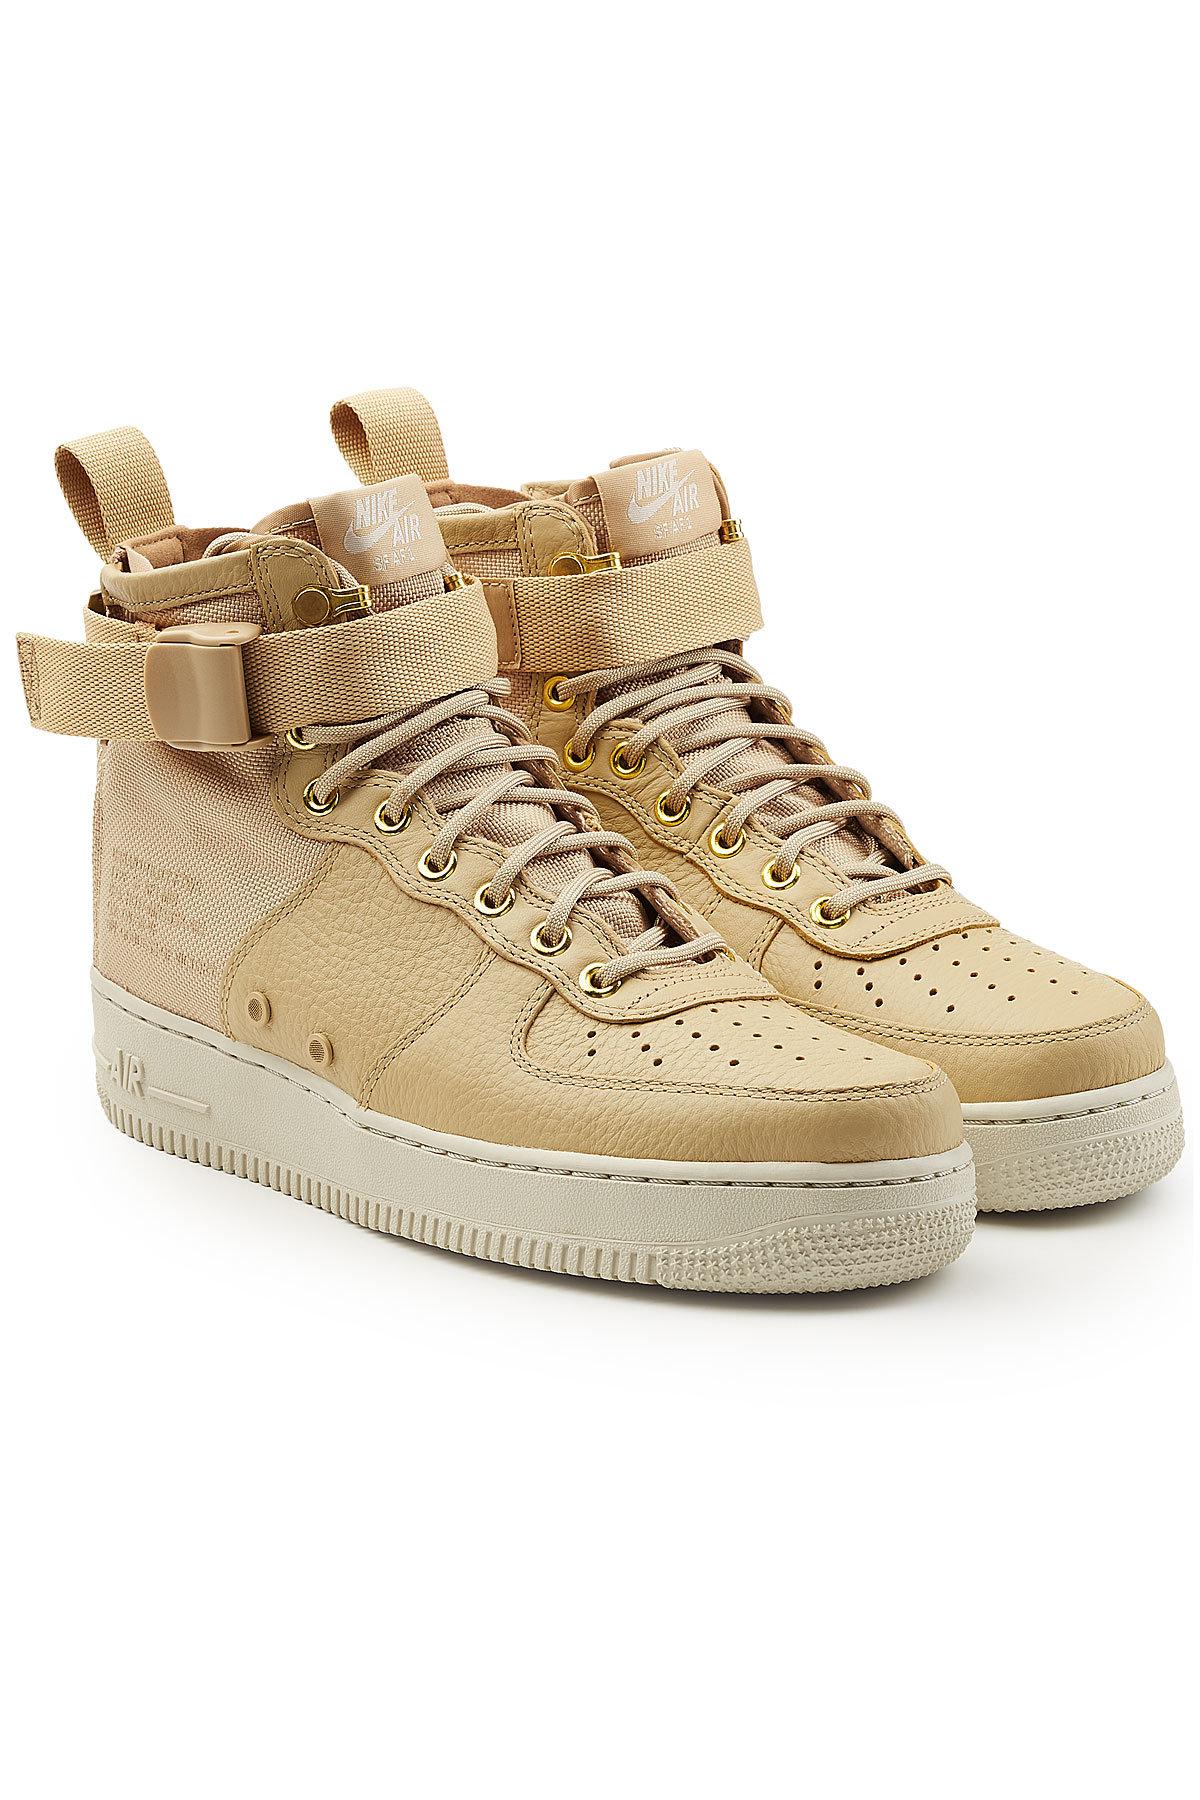 Lyst - Nike Sf Air Force 1 Mid Top Sneakers With Leather And Mesh in ...